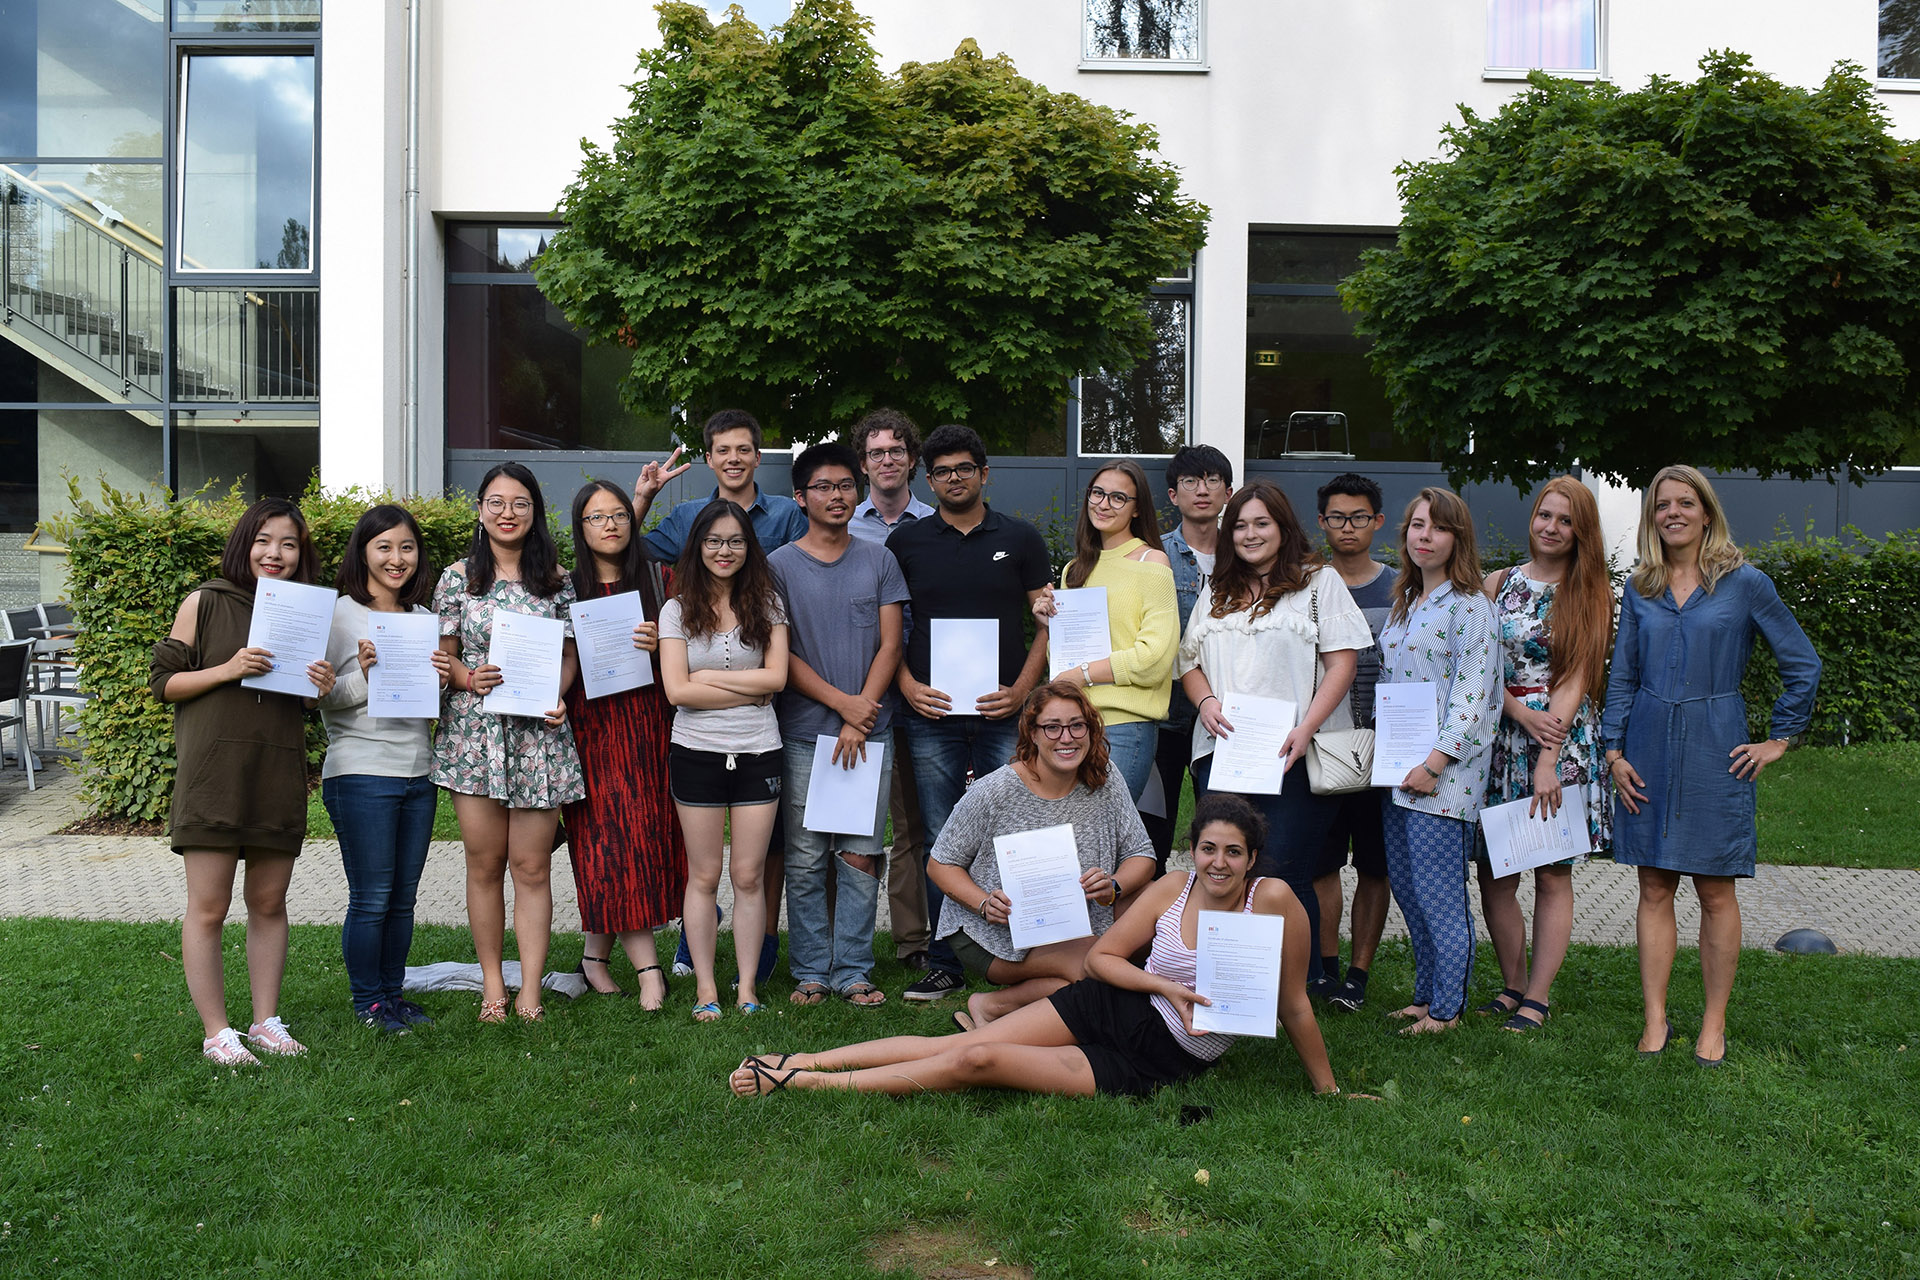 Group shot of ULISS summer school graduates with their diplomas